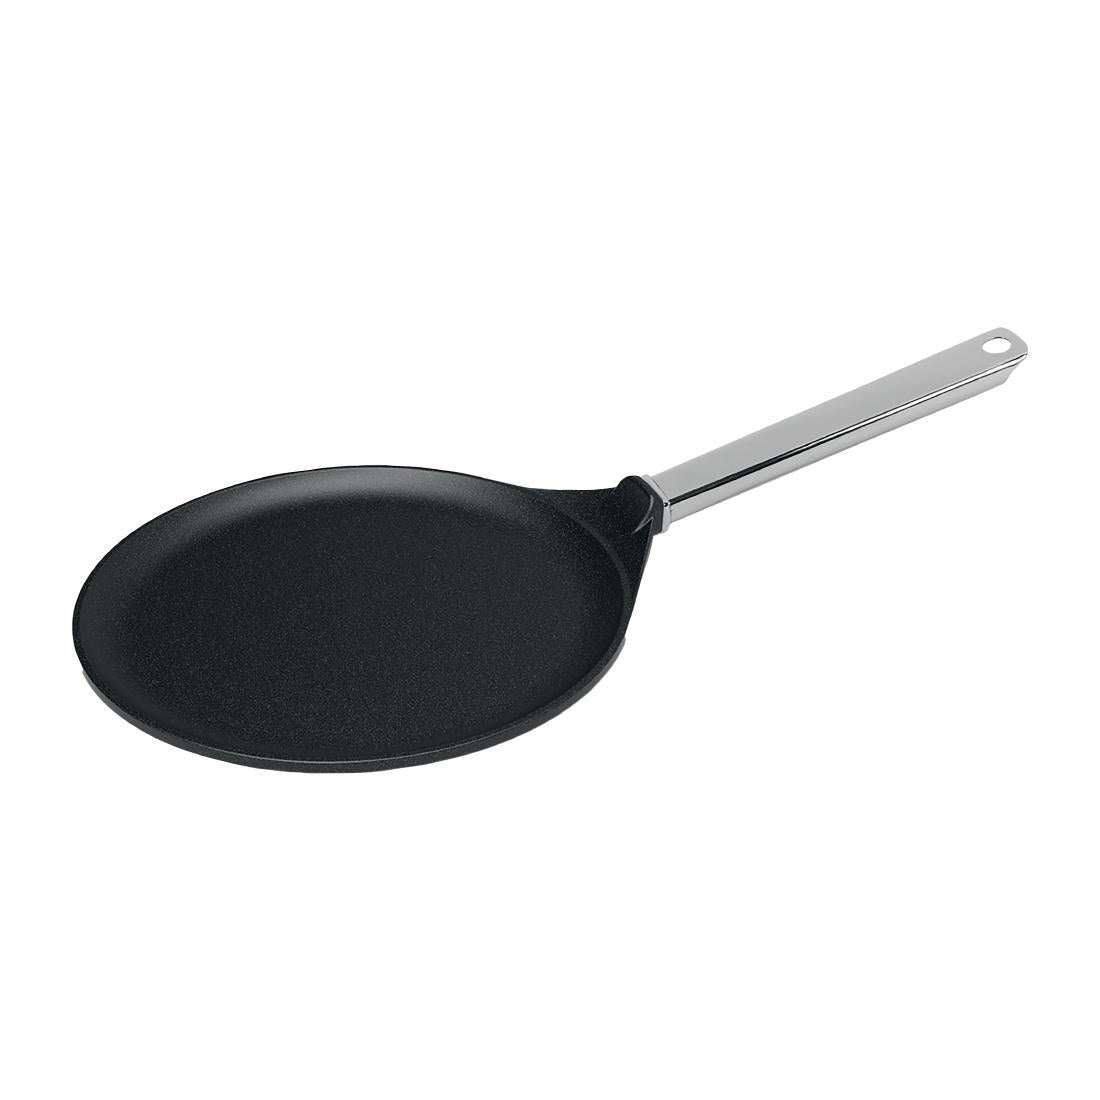 CH098 AMT Gastroguss Crepe Pan 280mm JD Catering Equipment Solutions Ltd